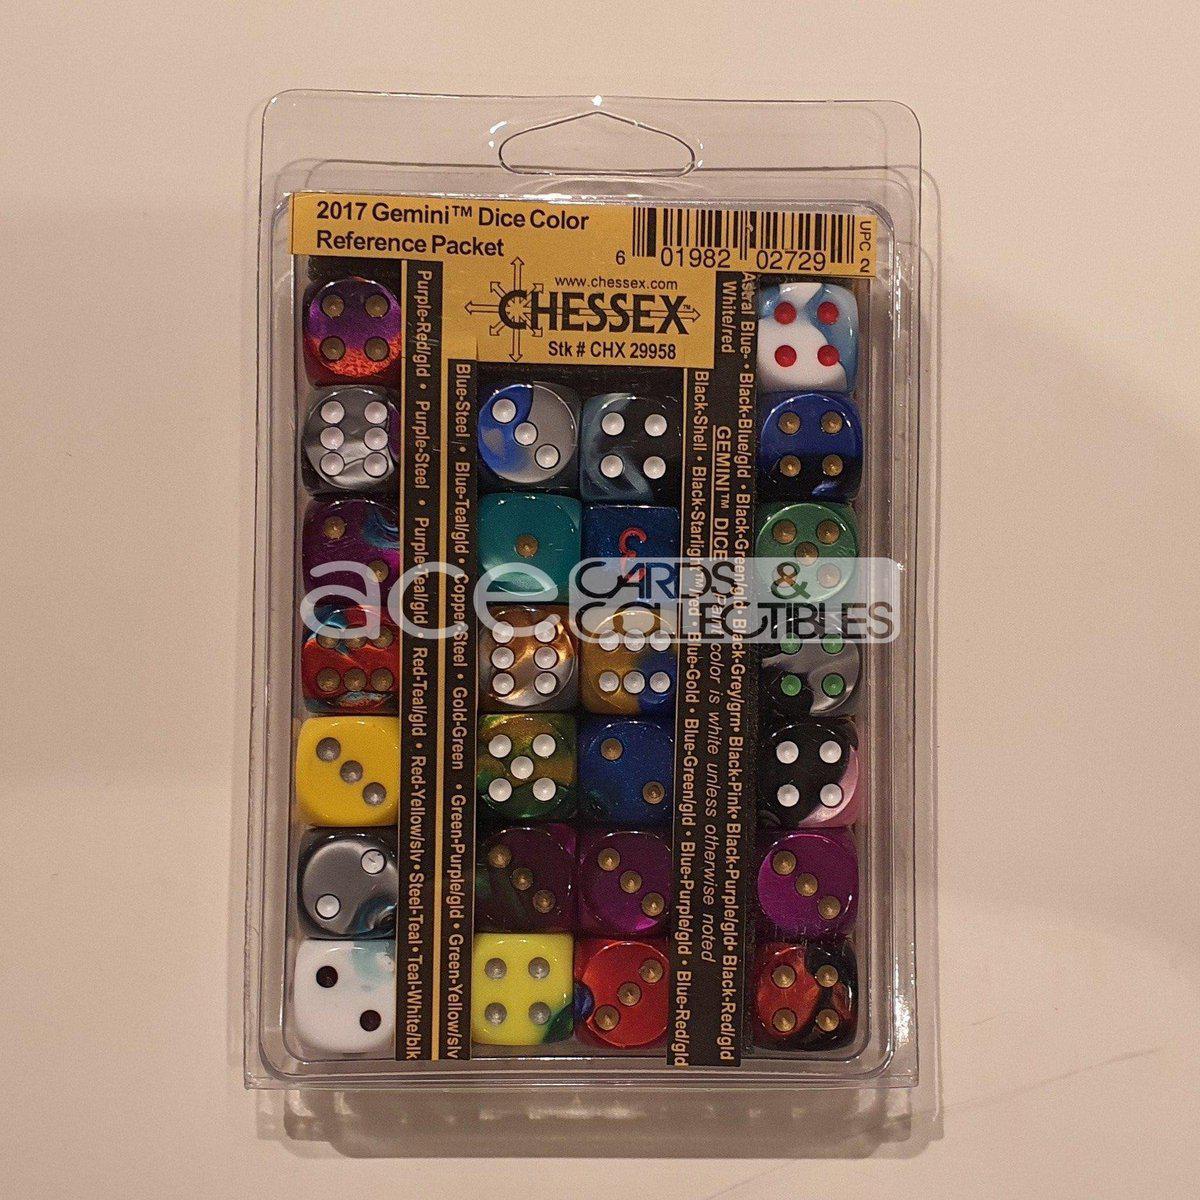 Chessex 2017 Gemini™ Color Reference Packet 26pcs Dice [CHX29958]-Chessex-Ace Cards & Collectibles